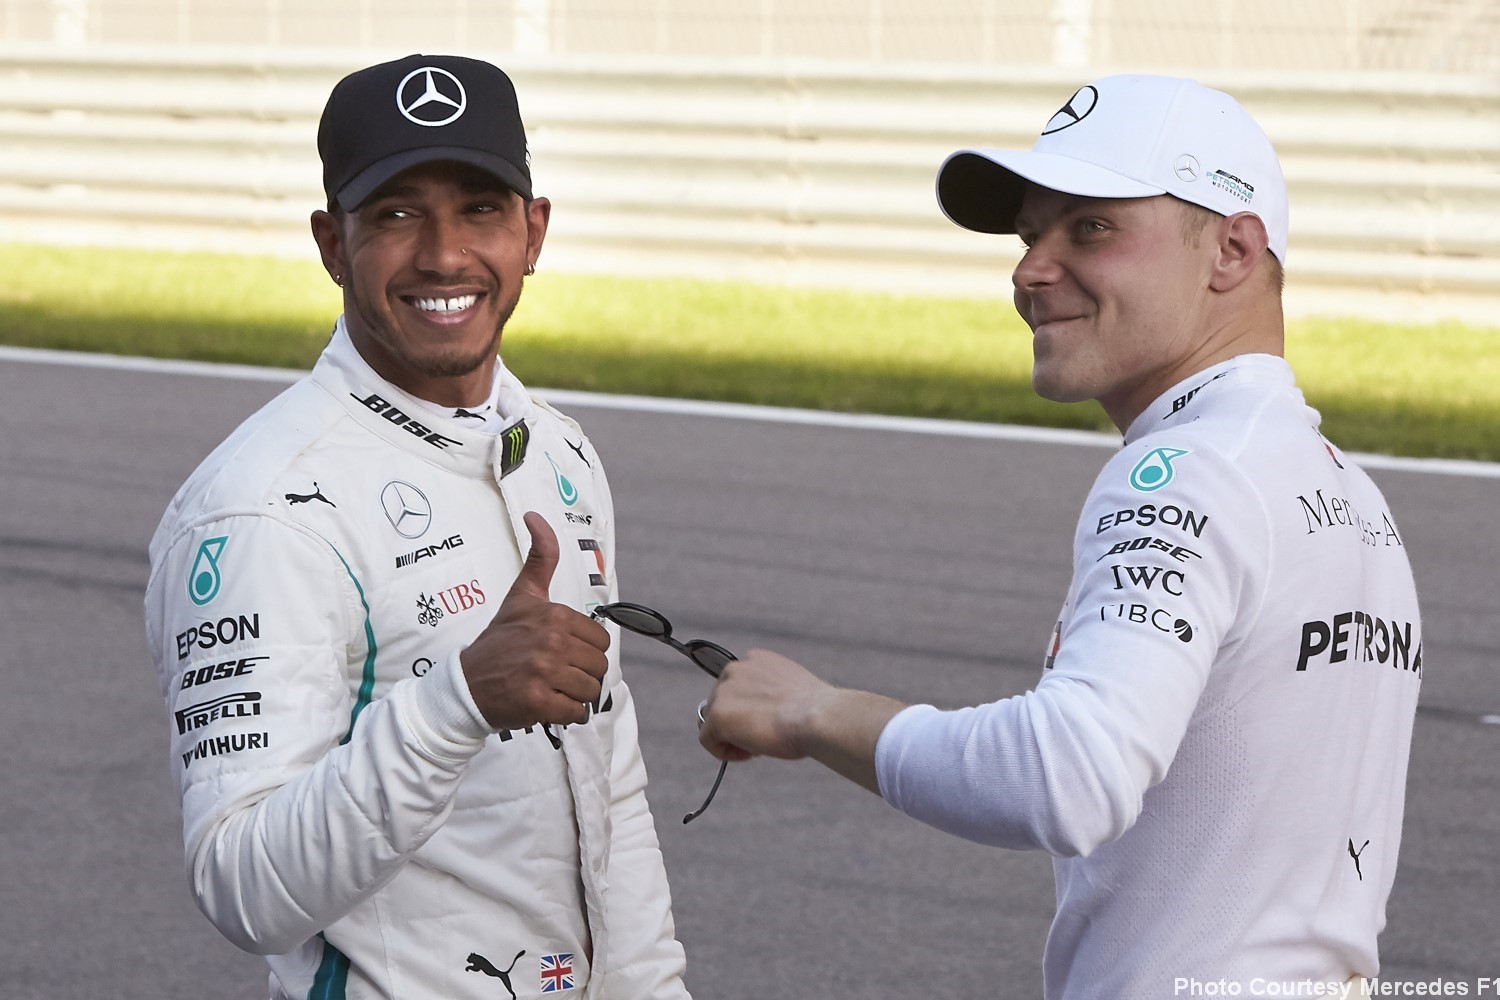 Hamilton will win on Sunday, as his slave driver Bottas will help him to increase his point lead